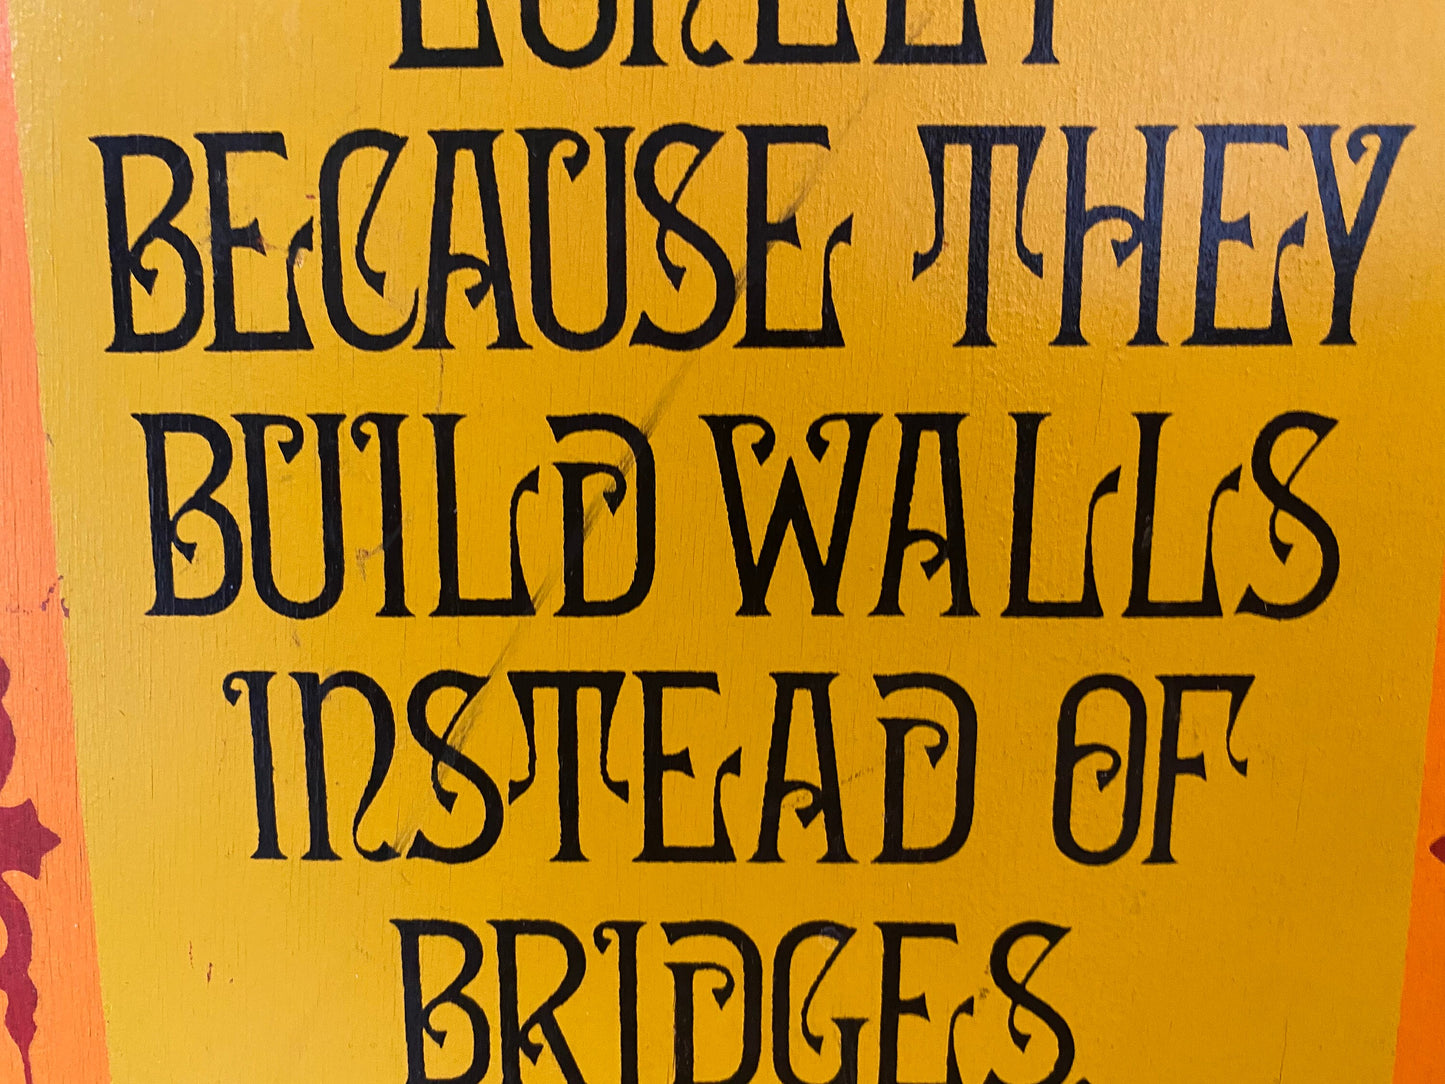 Vintage 1973 People are Lonely Because they Build Walls Instead of Bridges wall sign. Retro groovy 70s wall decor. Inspiration gift